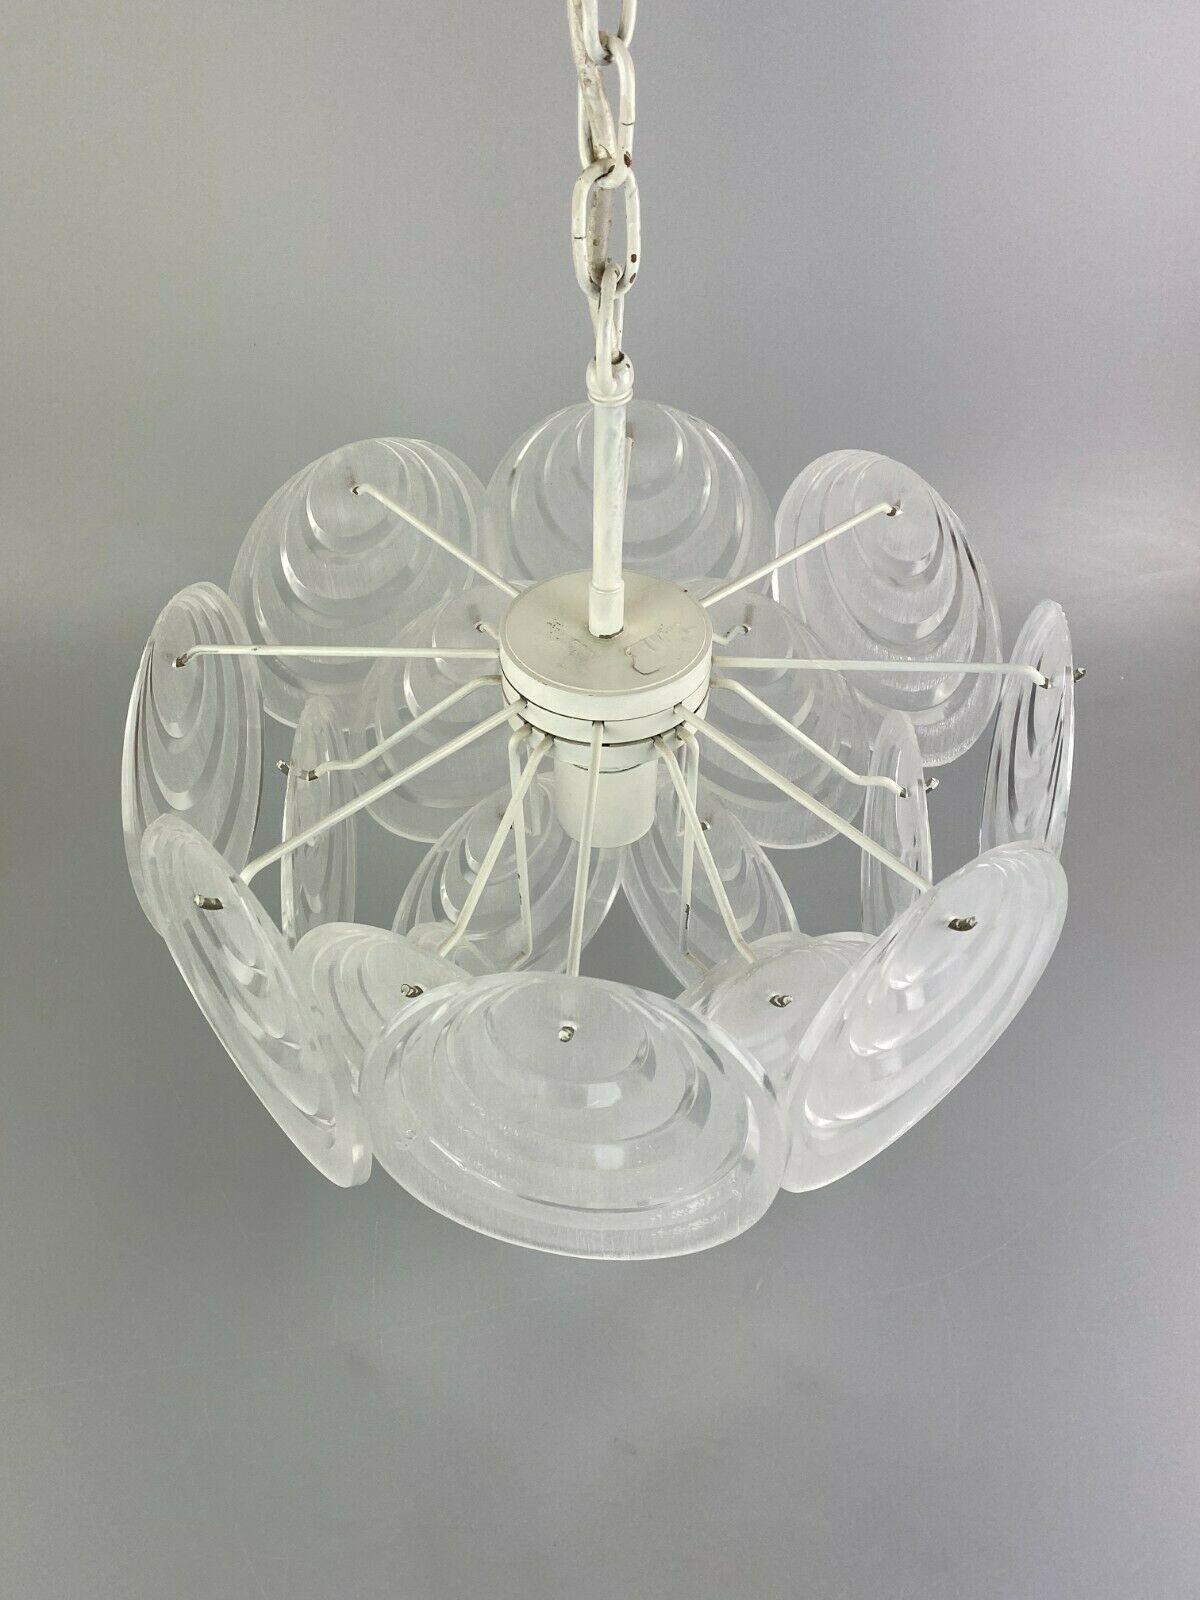 70s Lamp Light Hanging Lamp Ceiling Lamp Space Age Design Plastic In Good Condition For Sale In Neuenkirchen, NI